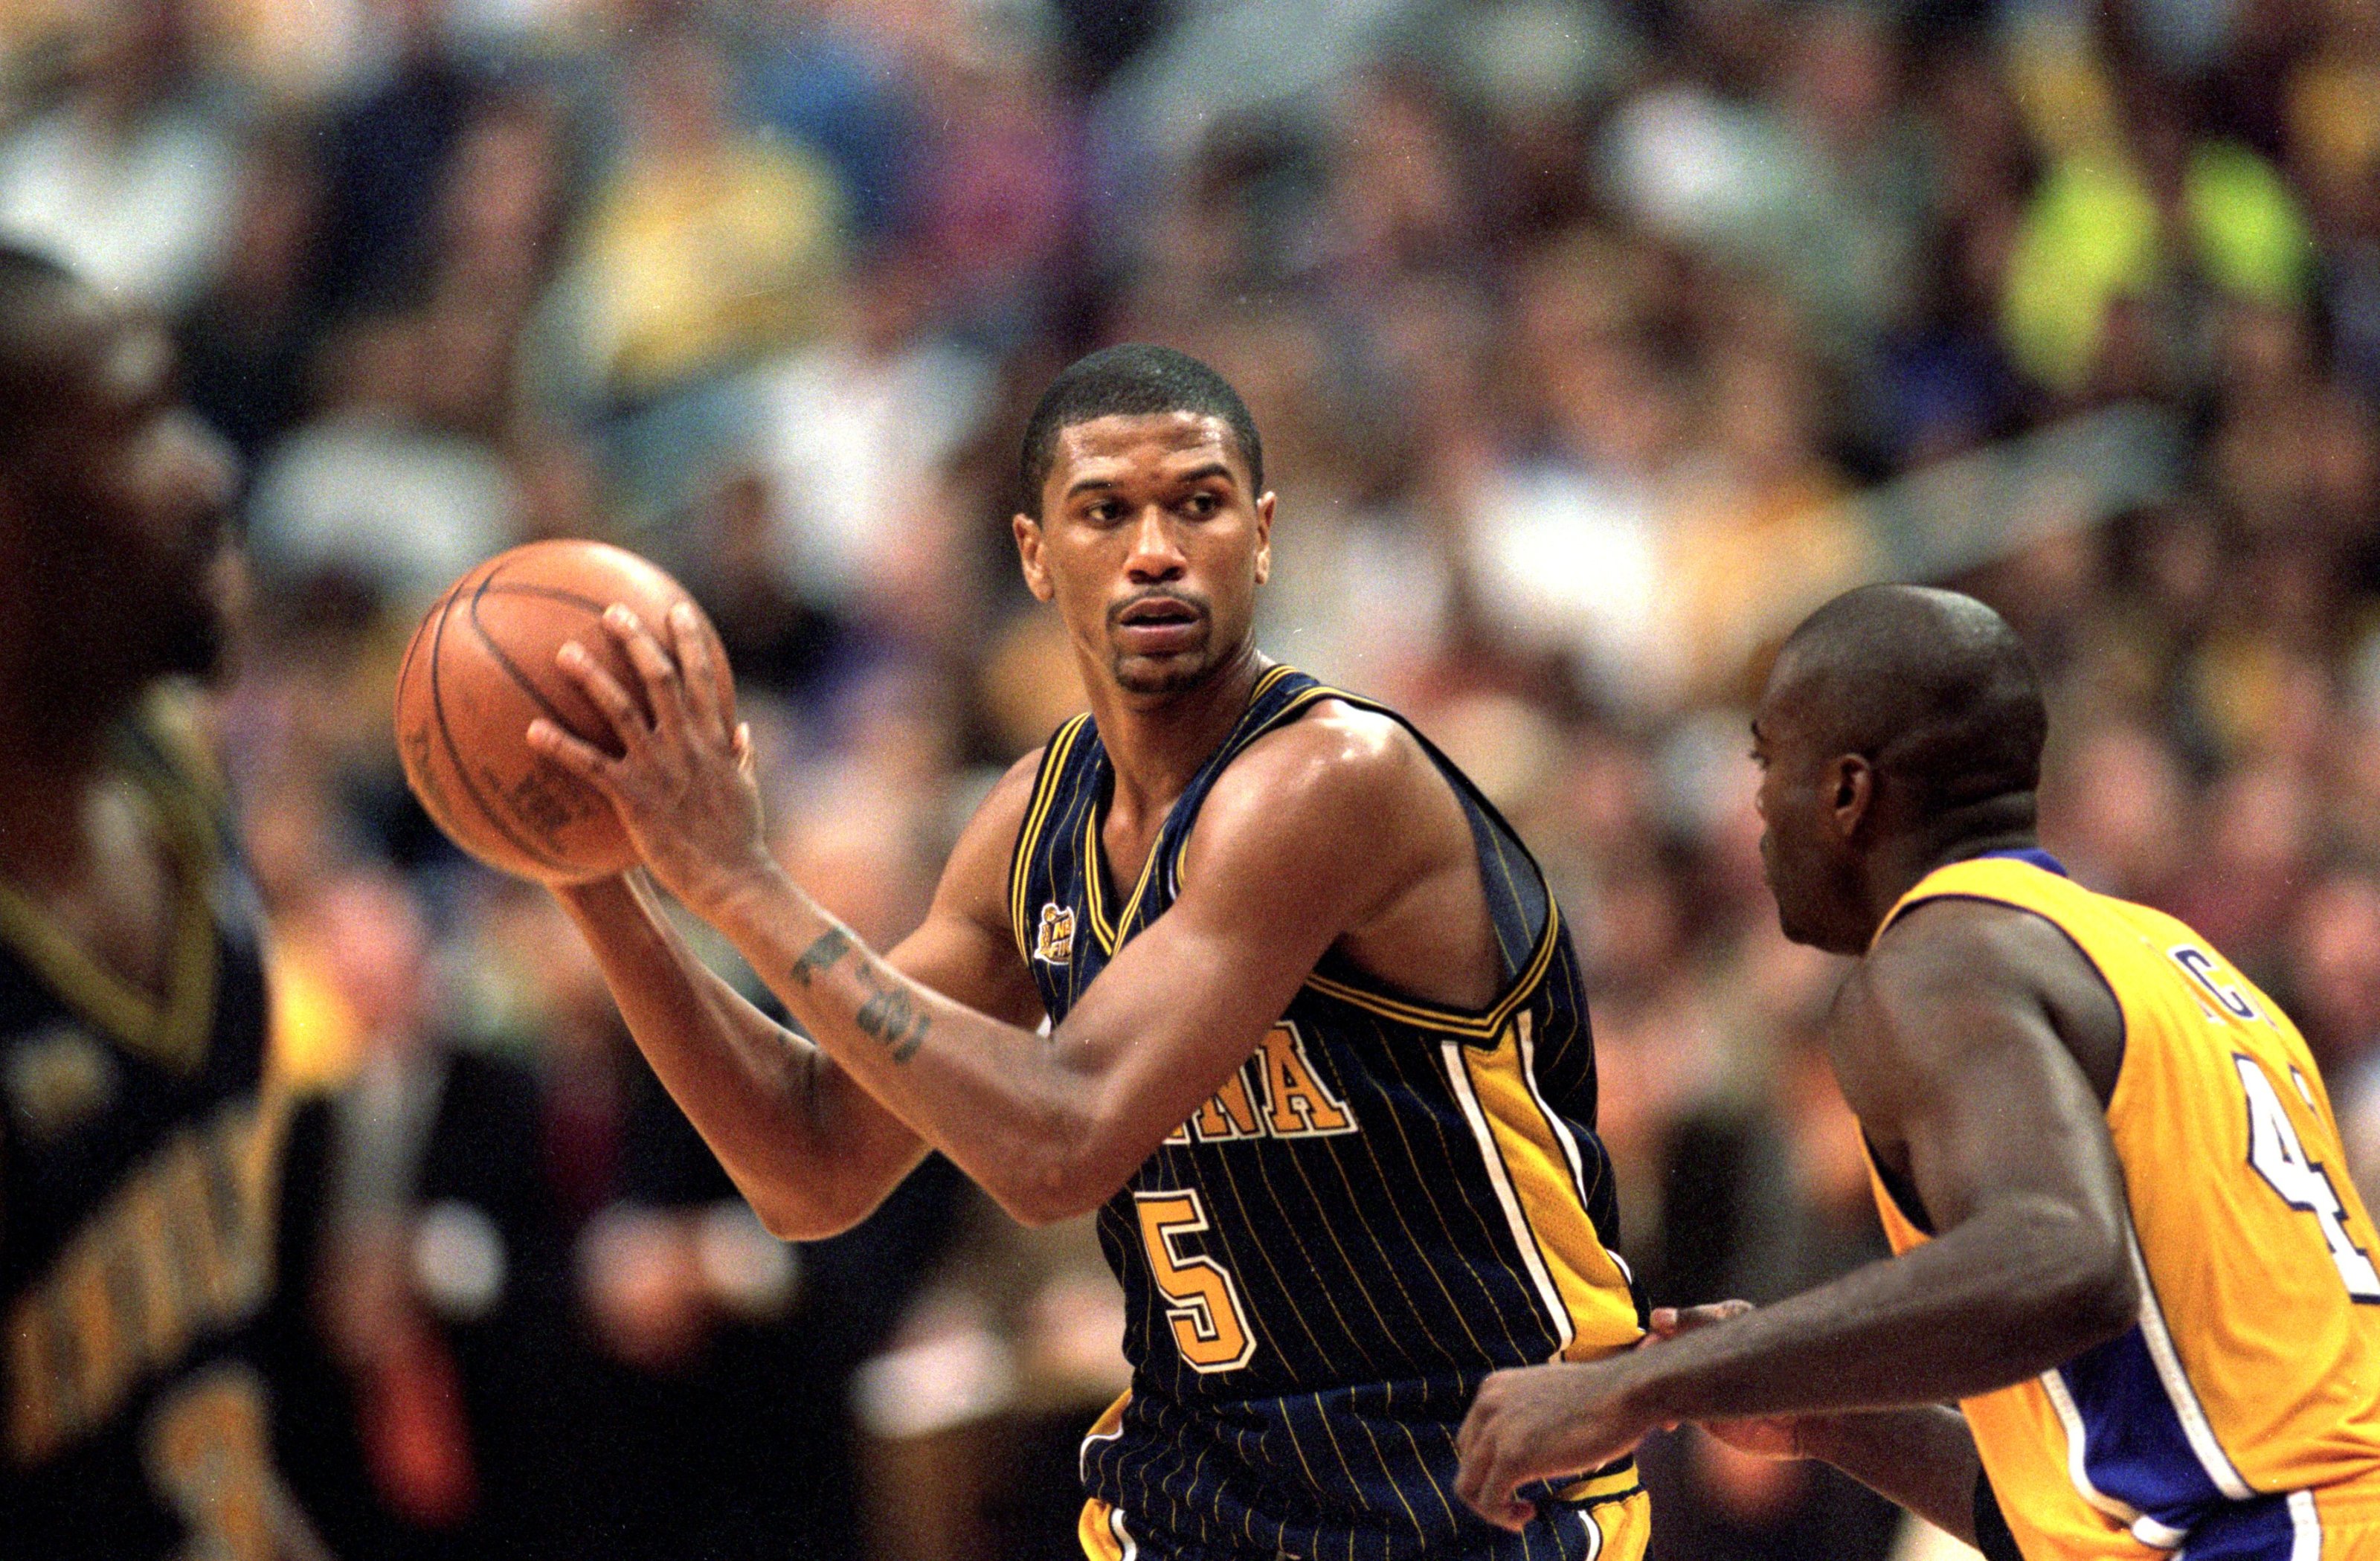 Jalen Rose was the first bust of the 2015 NBA Draft